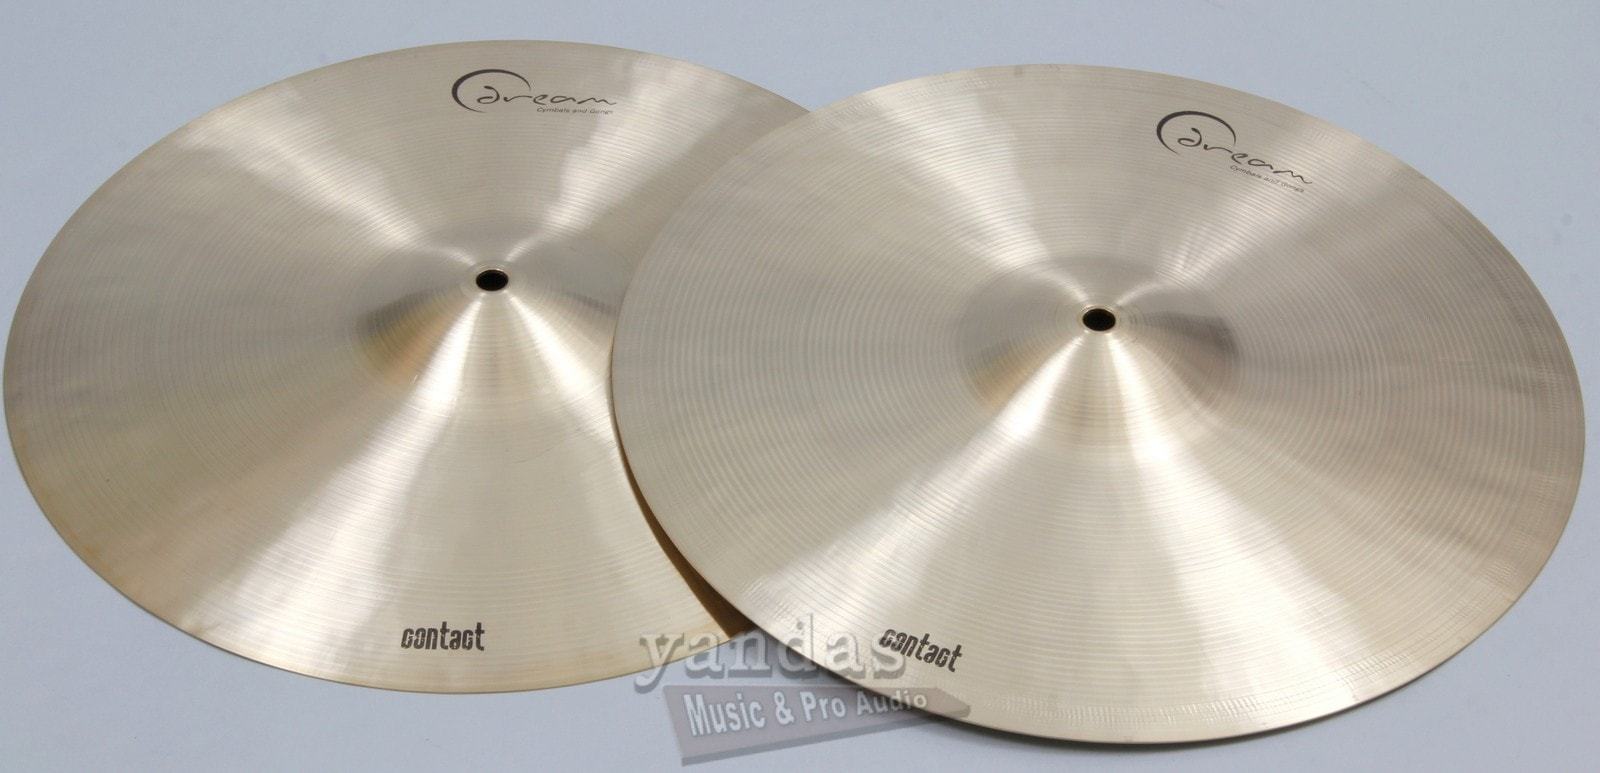 Dream Cymbals Contact Series Hi Hat Cymbal 15 Inch